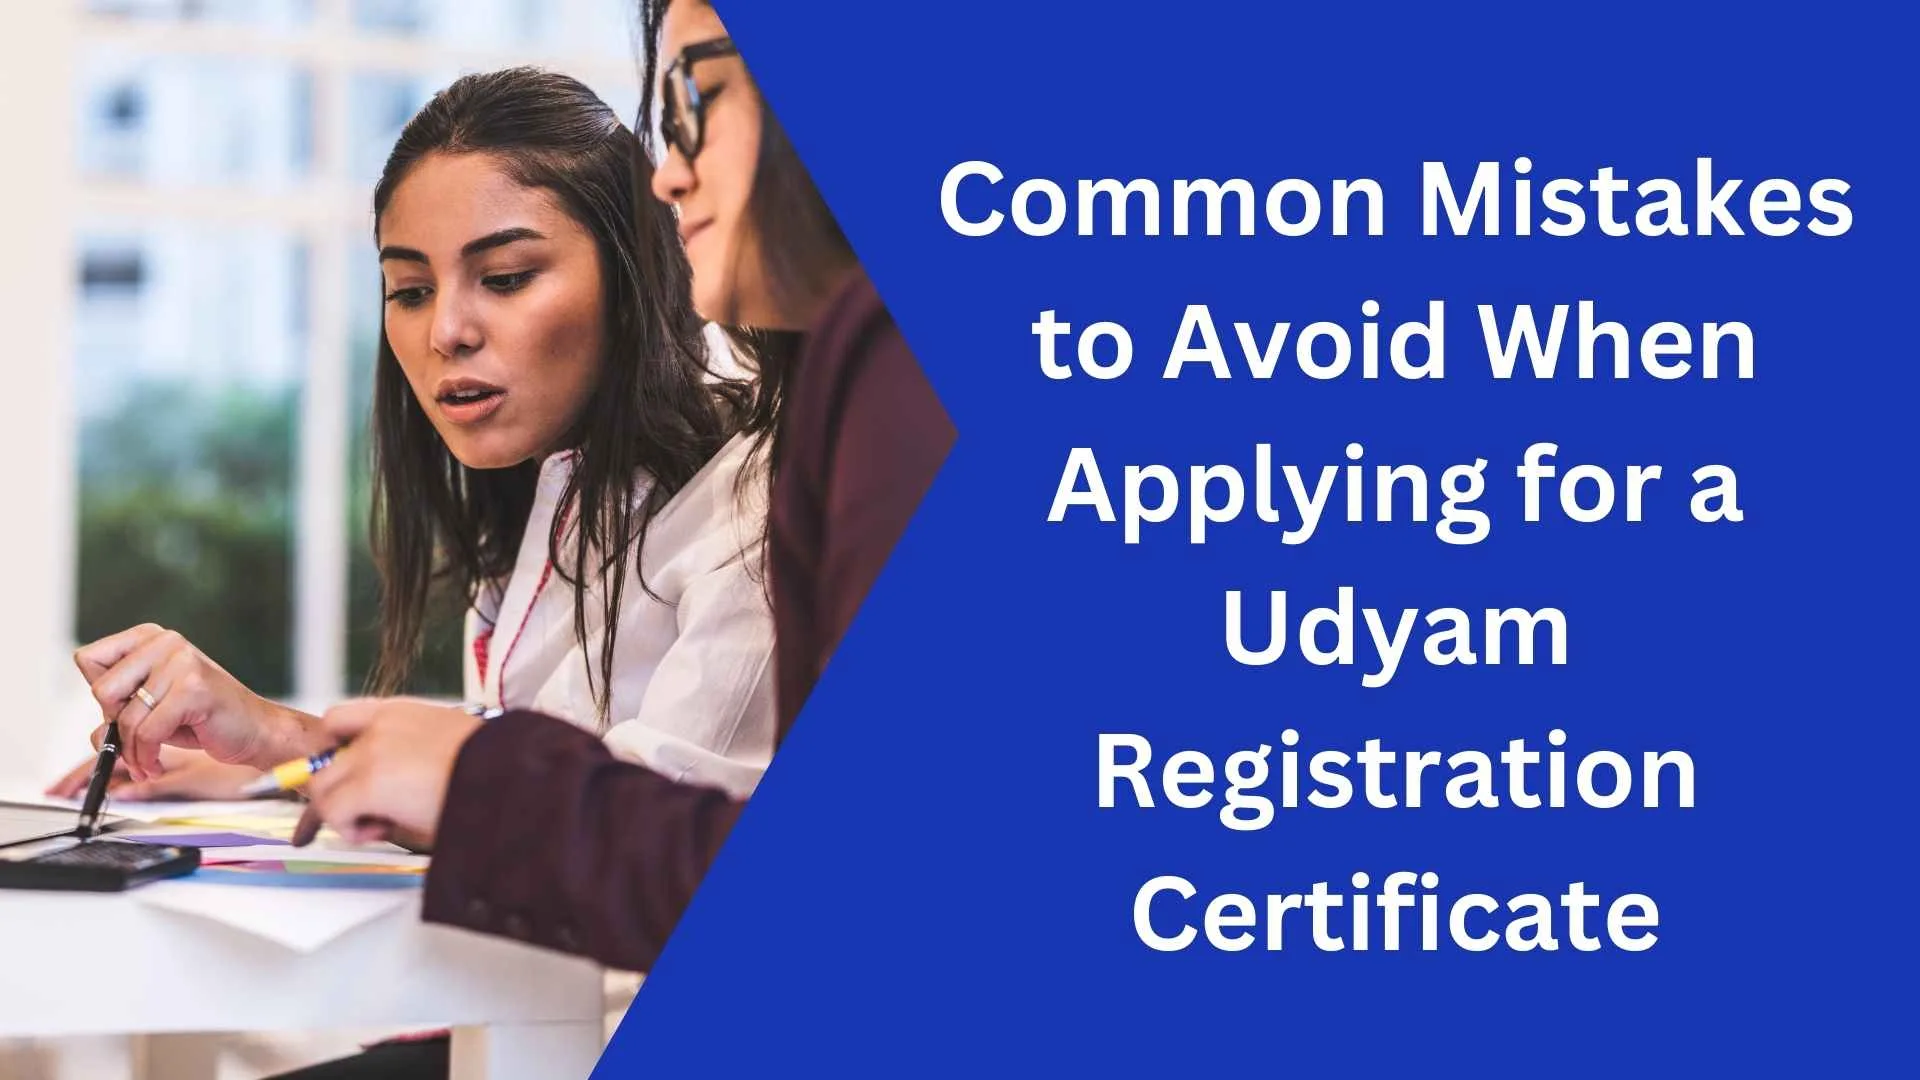 Common Mistakes to Avoid When Applying for a Udyam Registration Certificate